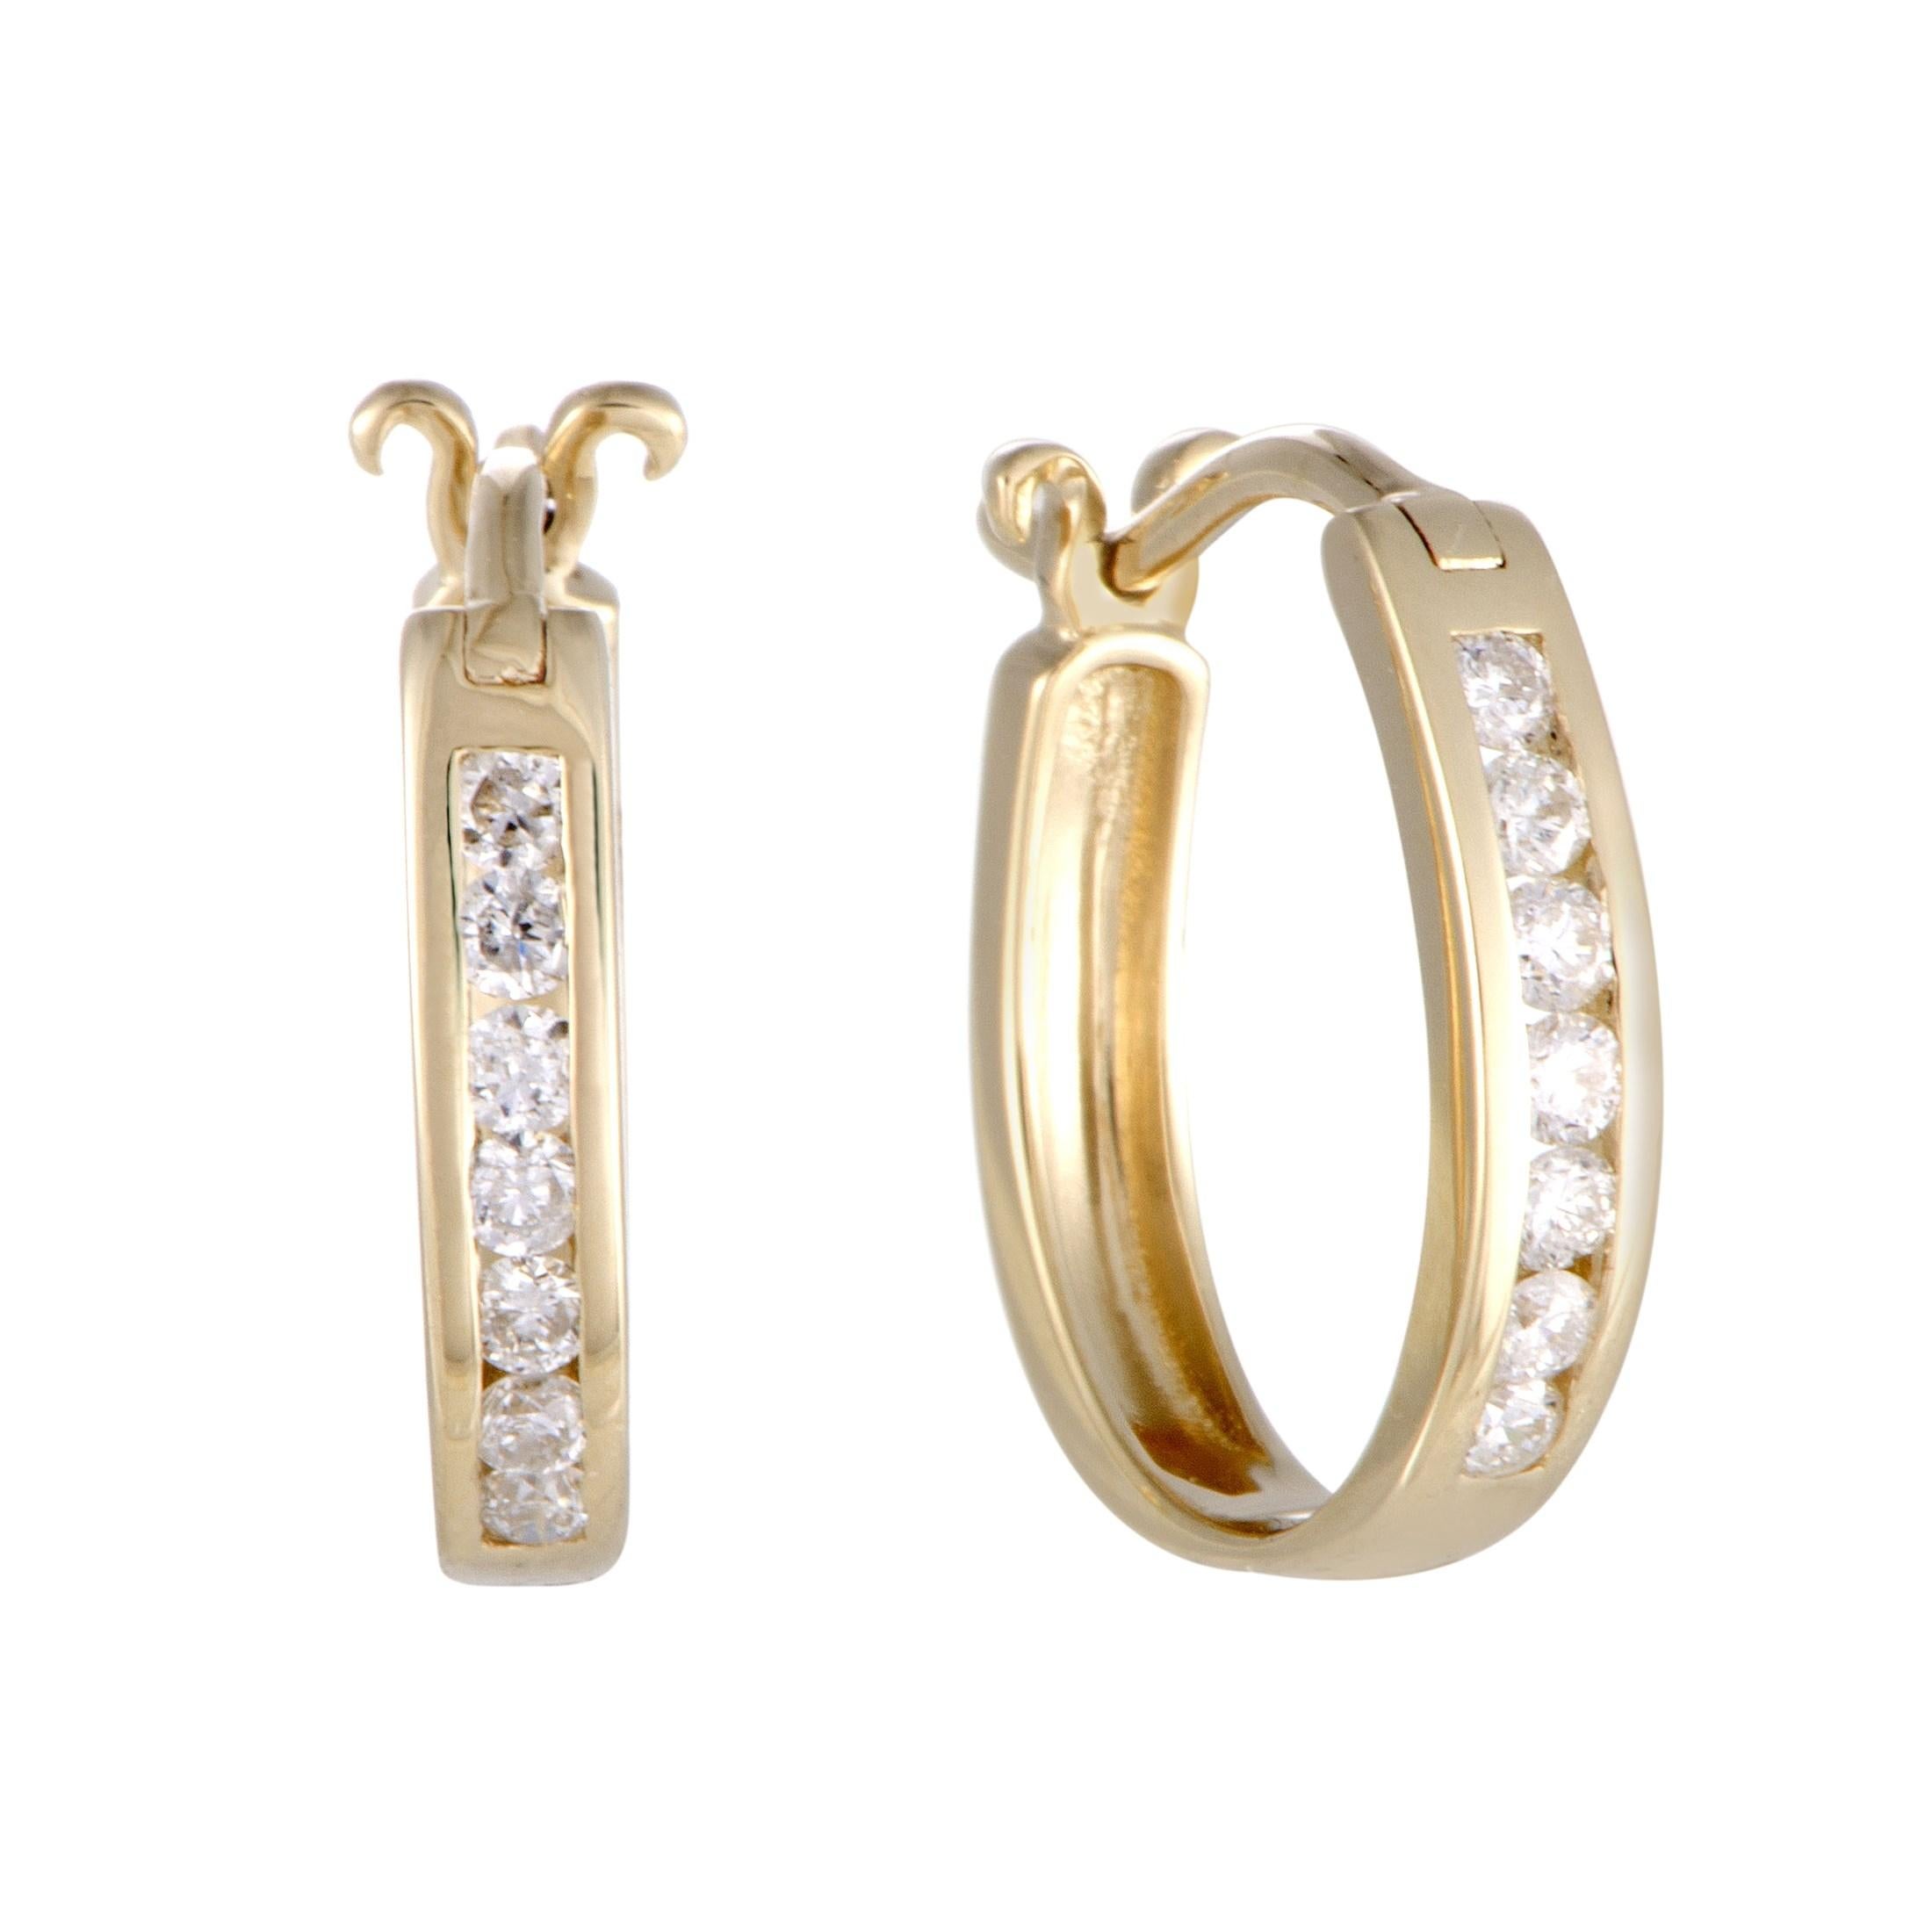 LB Exclusive 14K Yellow Gold 0.25 Ct Diamond Small Oval Hoop Earrings In Excellent Condition For Sale In Southampton, PA